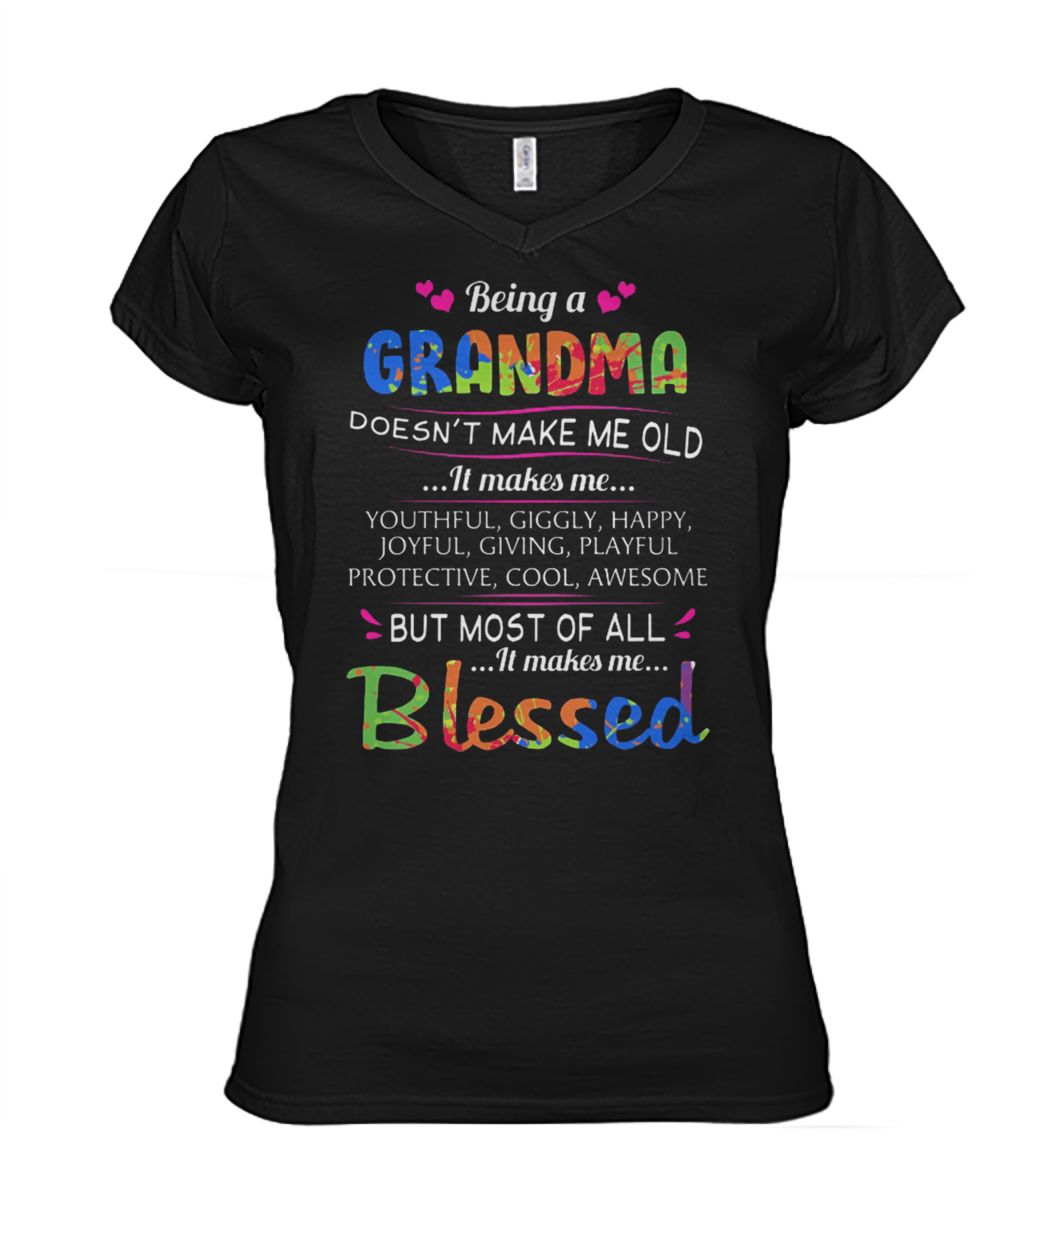 Being a grandma doesn't make me old it makes me youthful giggly happy women's v-neck